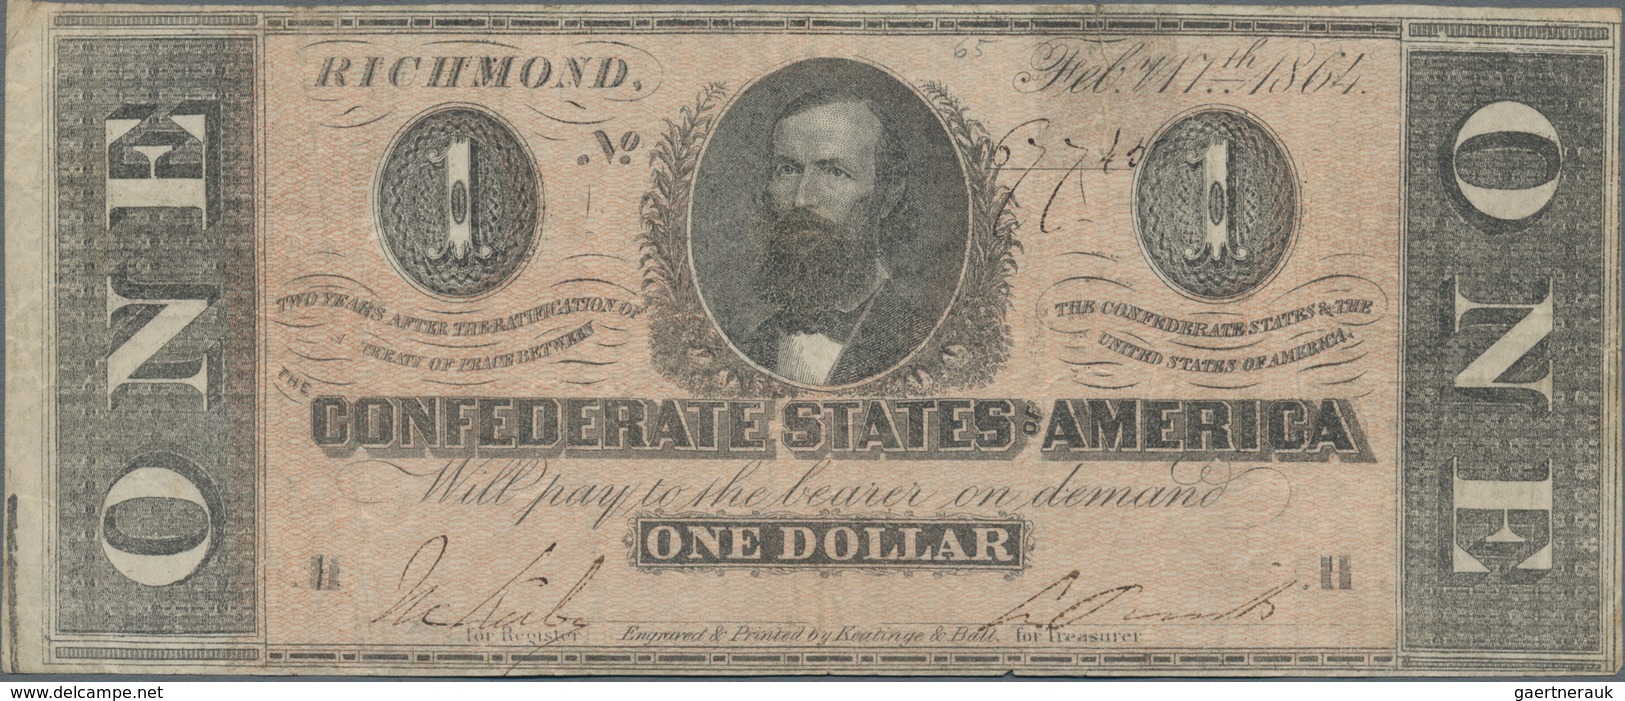 United States of America - Confederate States: Interesting lot with 9 Confederate Banknotes and Loan